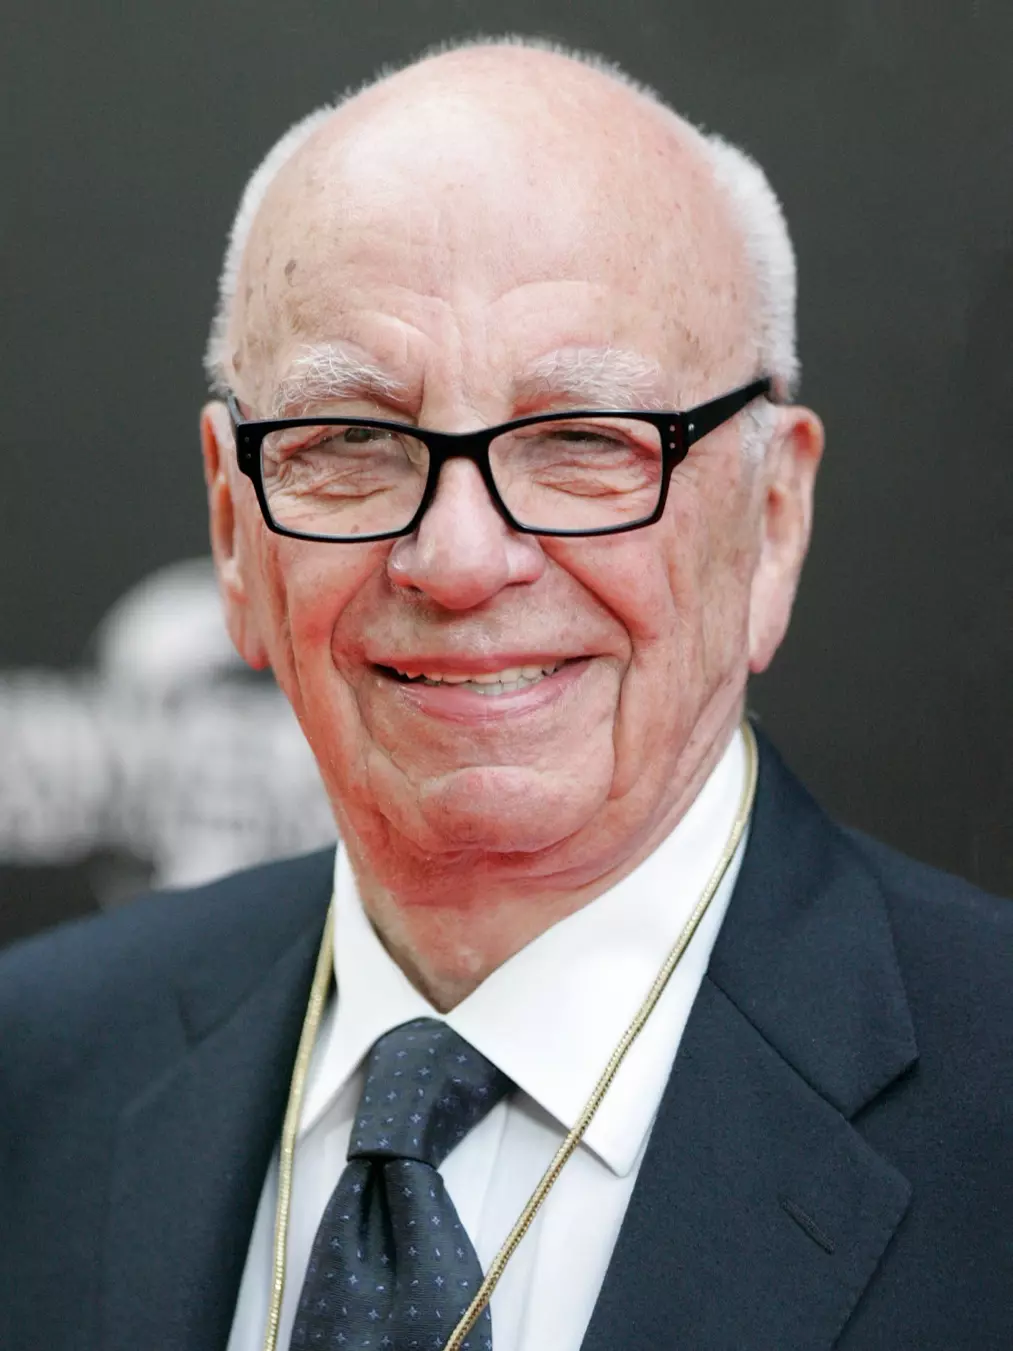 Media mogul Rupert Murdoch gets engaged at 92, set to marry for fifth time